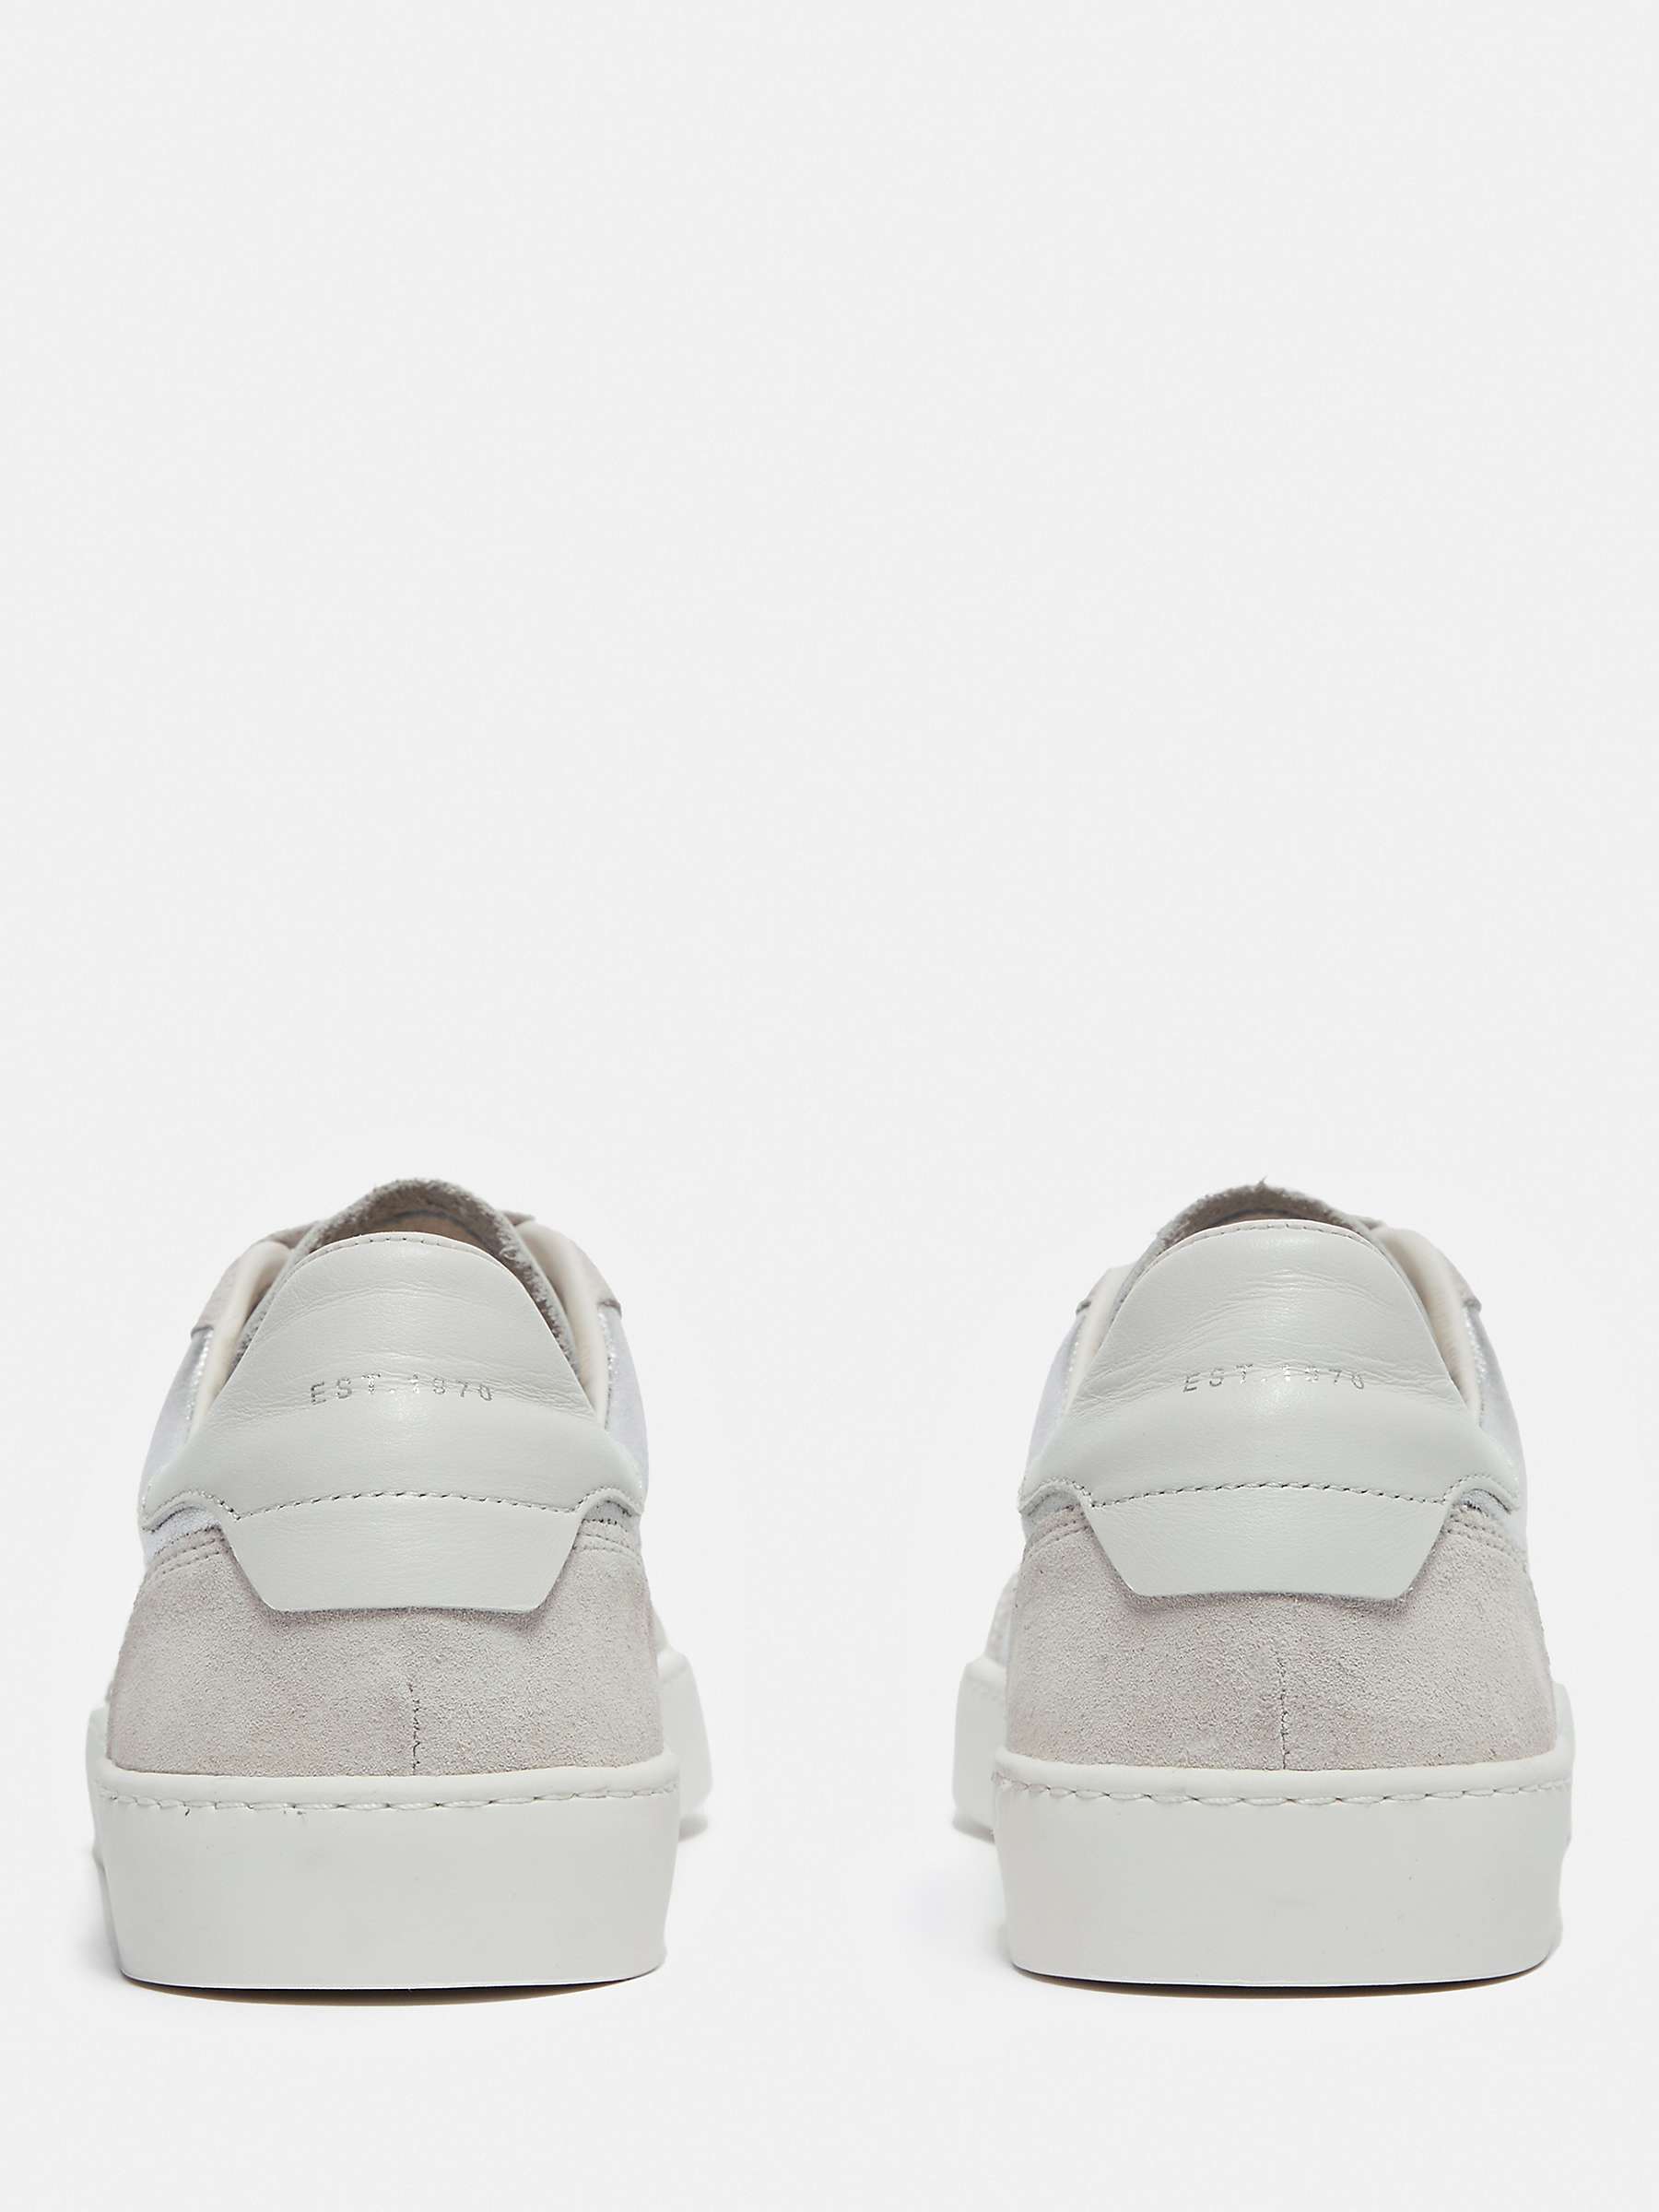 Buy Jigsaw Classic Low Top Leather Trainers, Silver Online at johnlewis.com